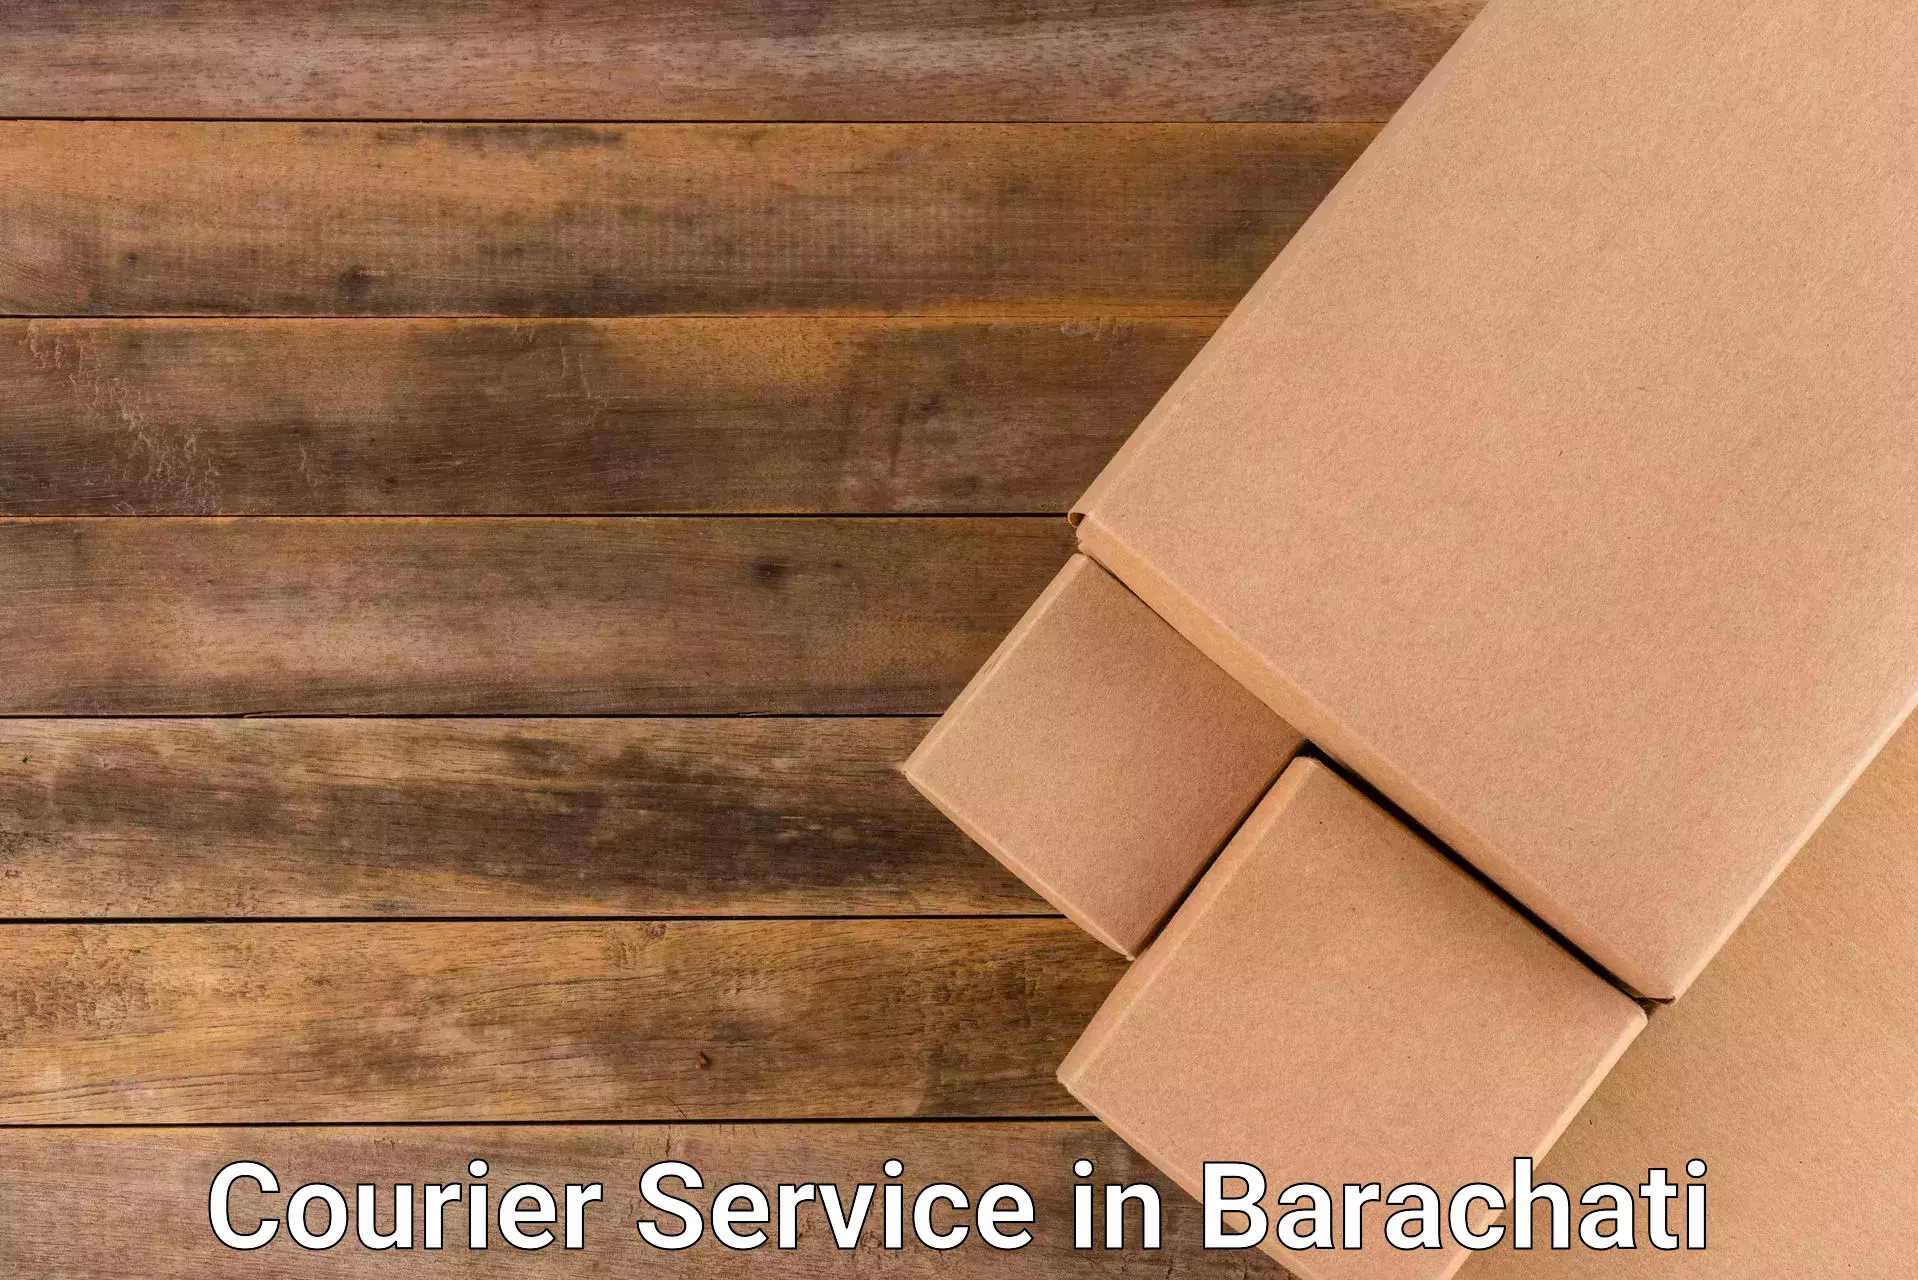 Next day courier in Barachati